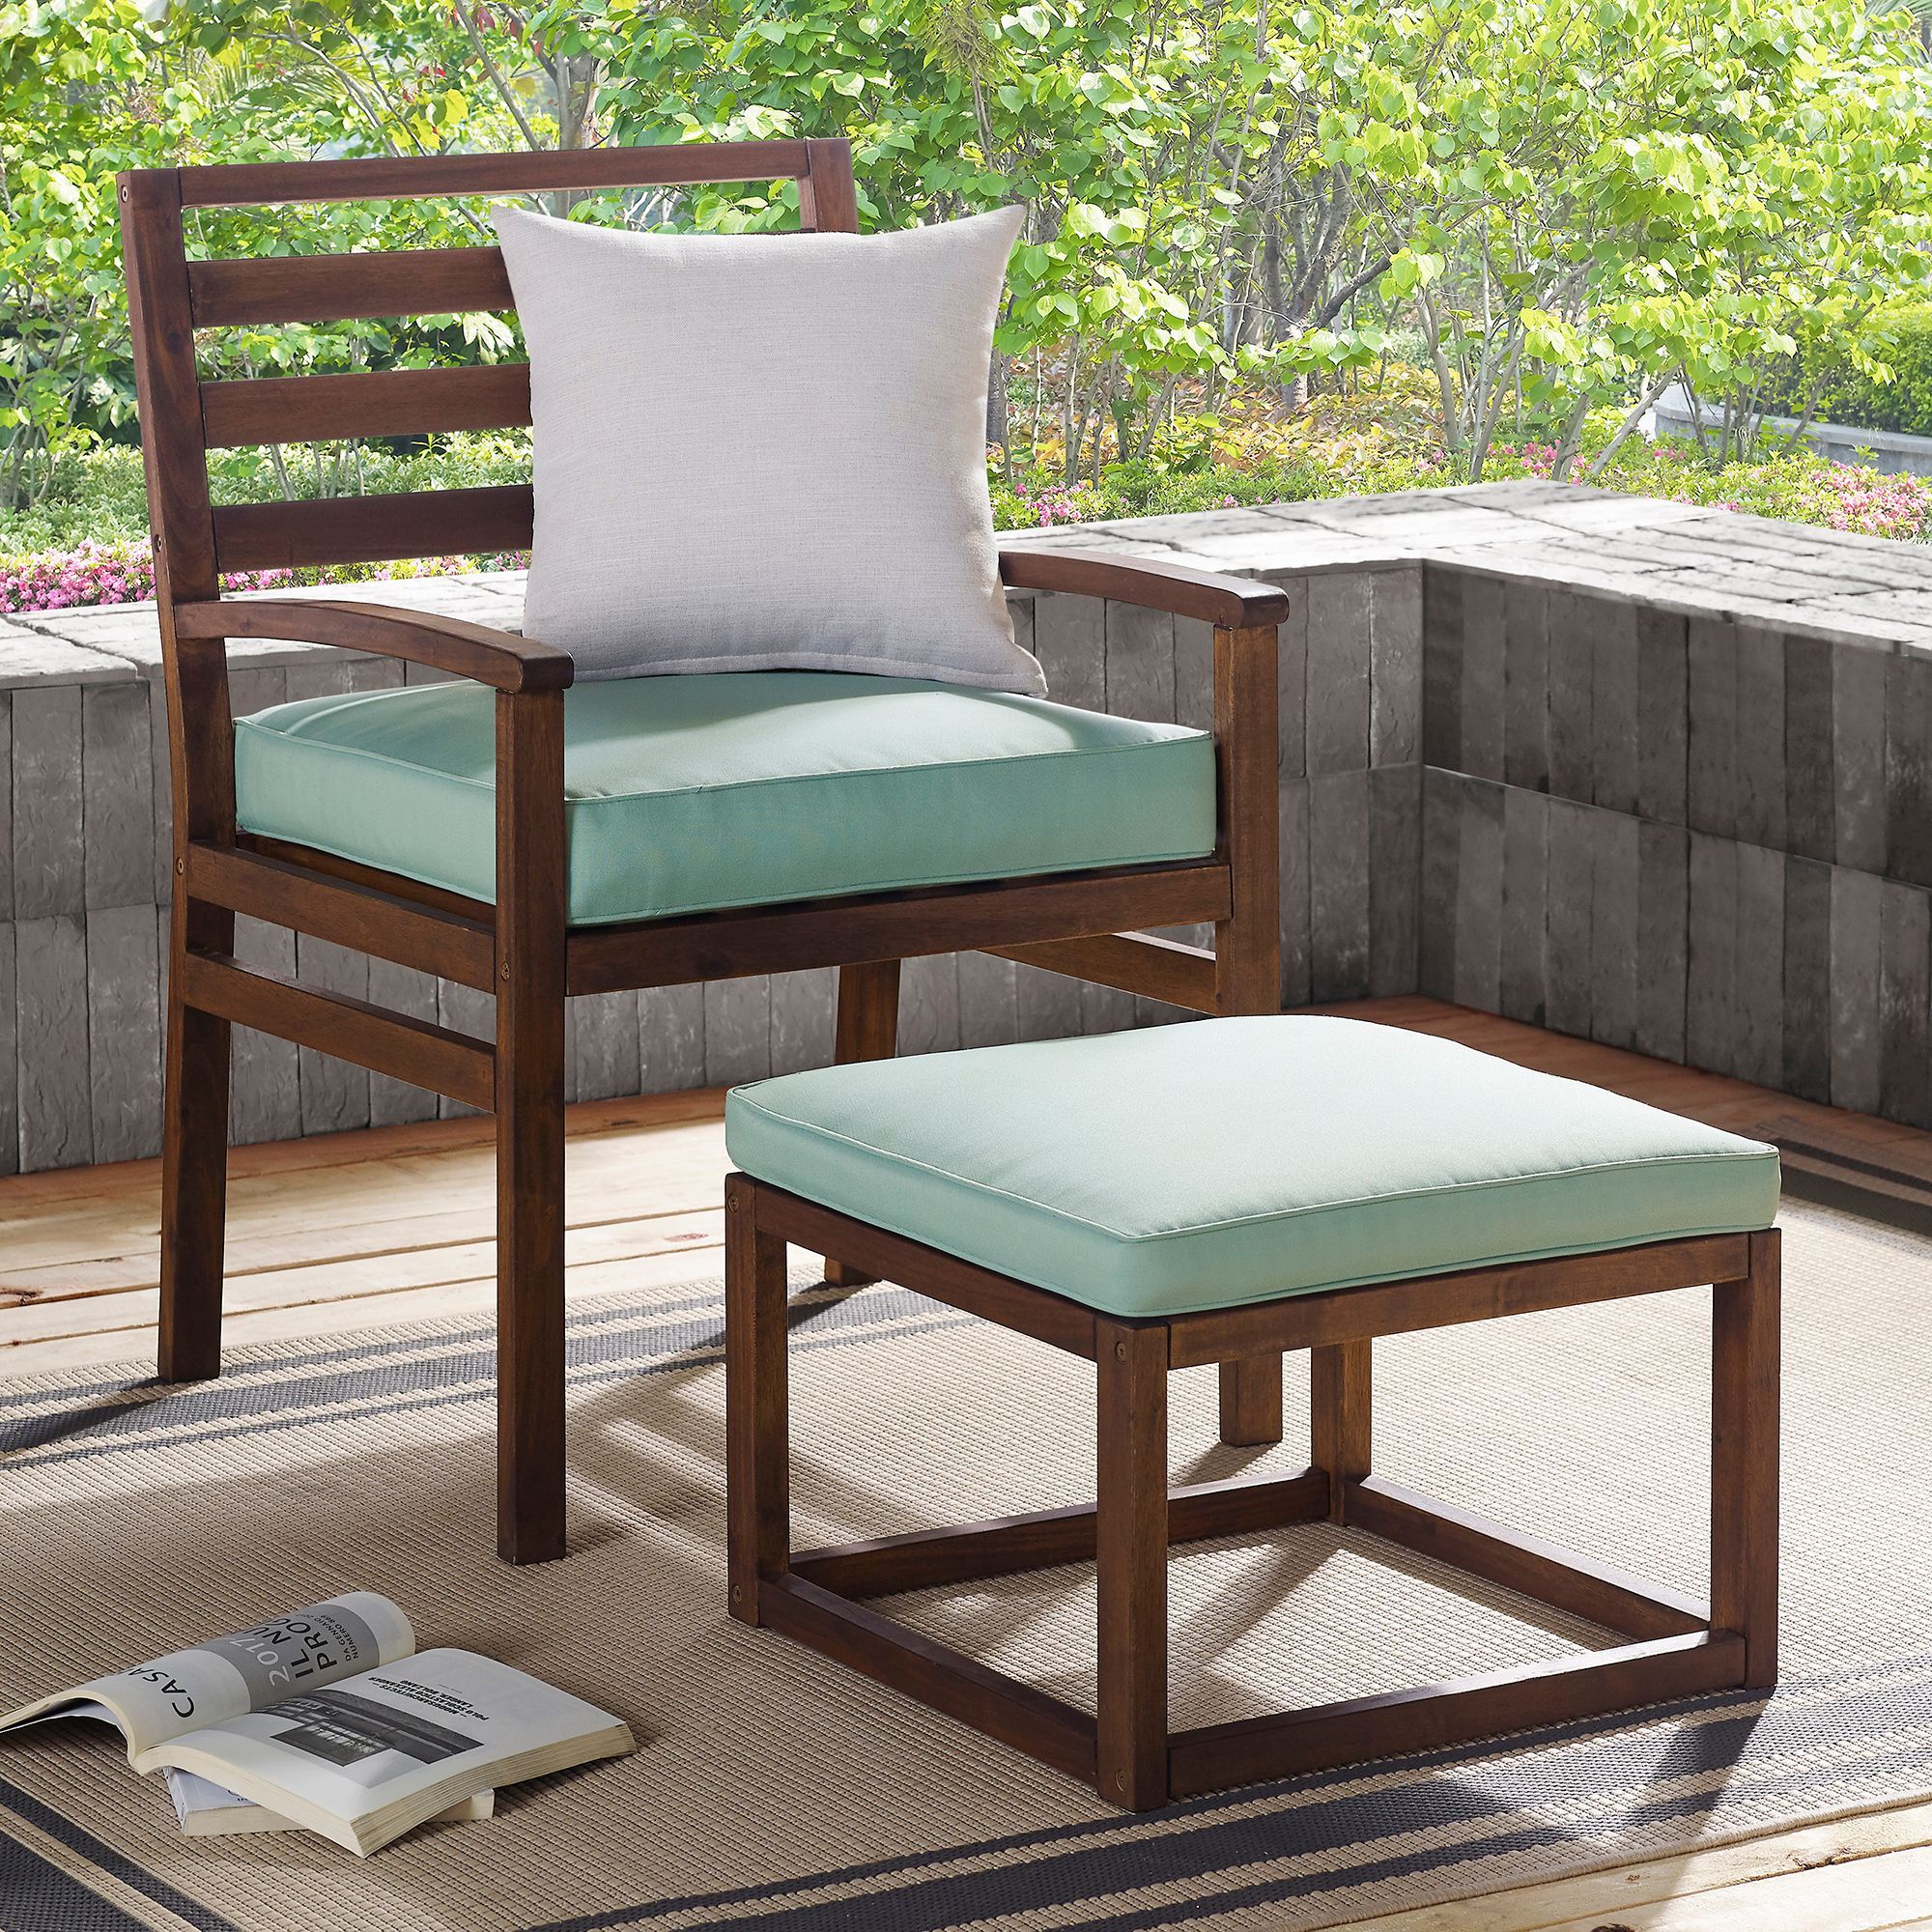 Manor Park Acacia Wood Outdoor Patio Chair & Pull Out Ottoman – Dark Pertaining To Dark Wood Outdoor Chairs (View 12 of 15)